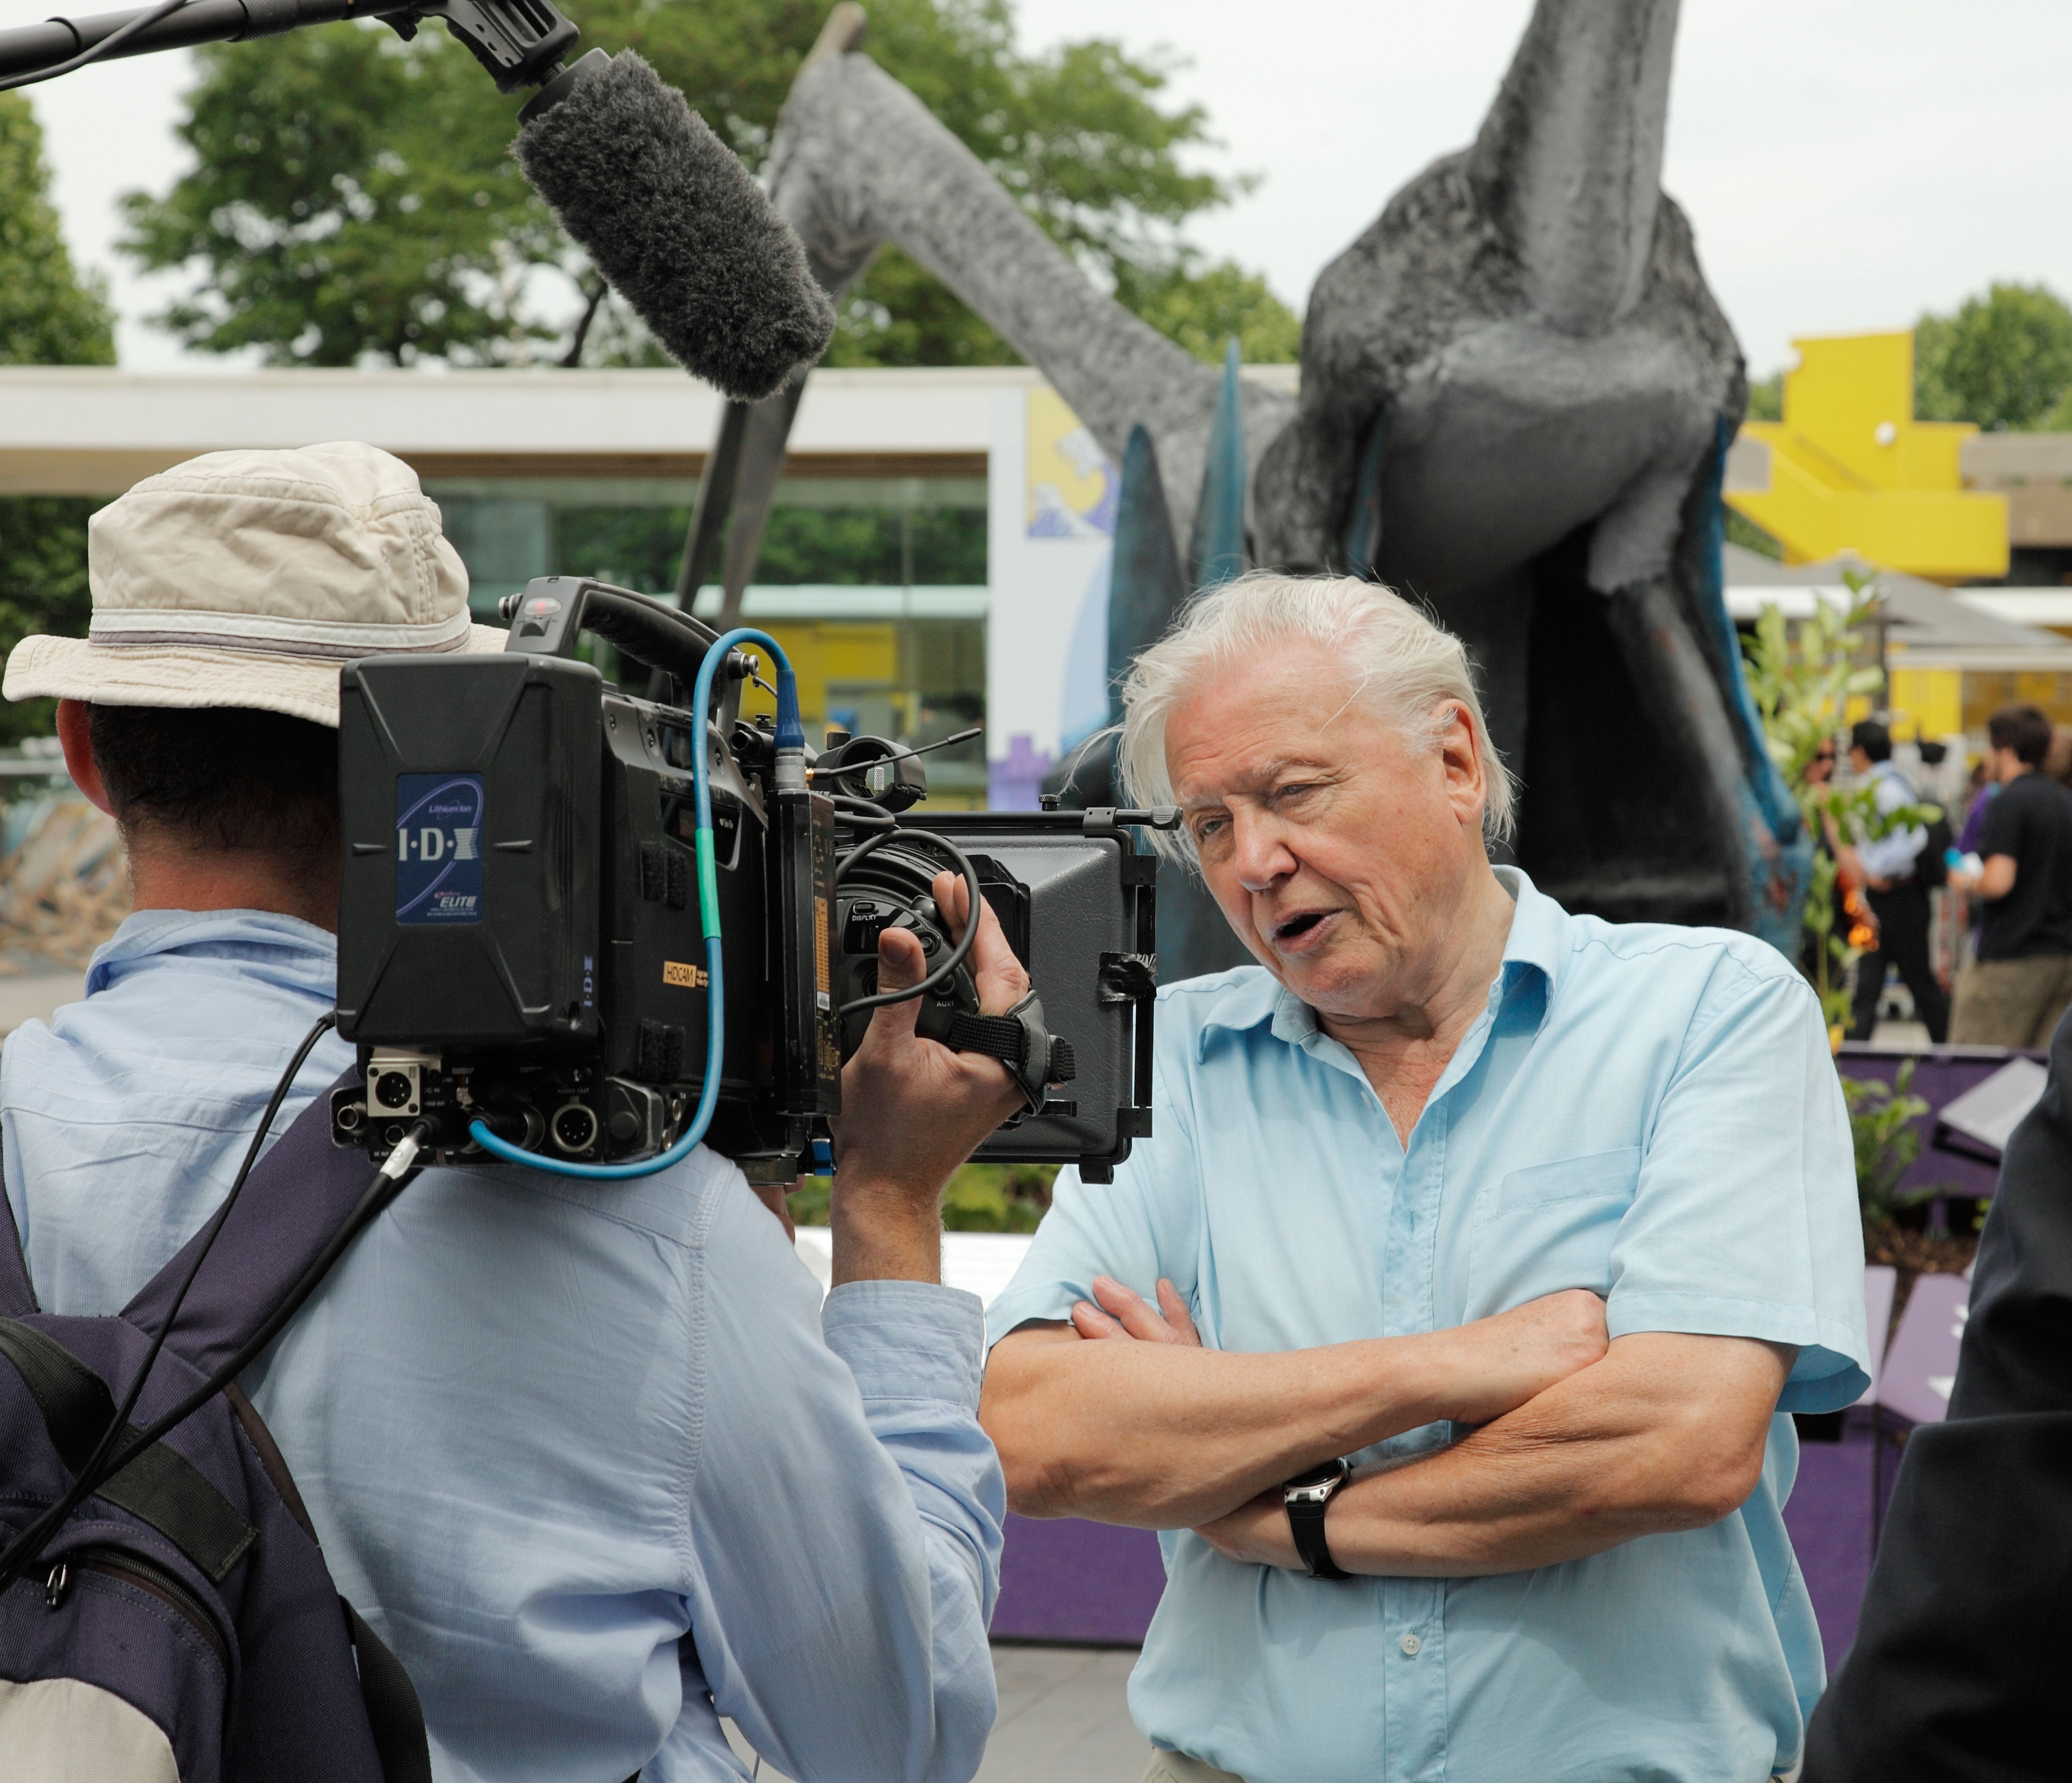 Sir David Attenborough presents and does the voice-over for the new BBC series Dynasties: The Greatest of Their Kind, a co-production with China’s Tencent Penguin Pictures and CCTV9.